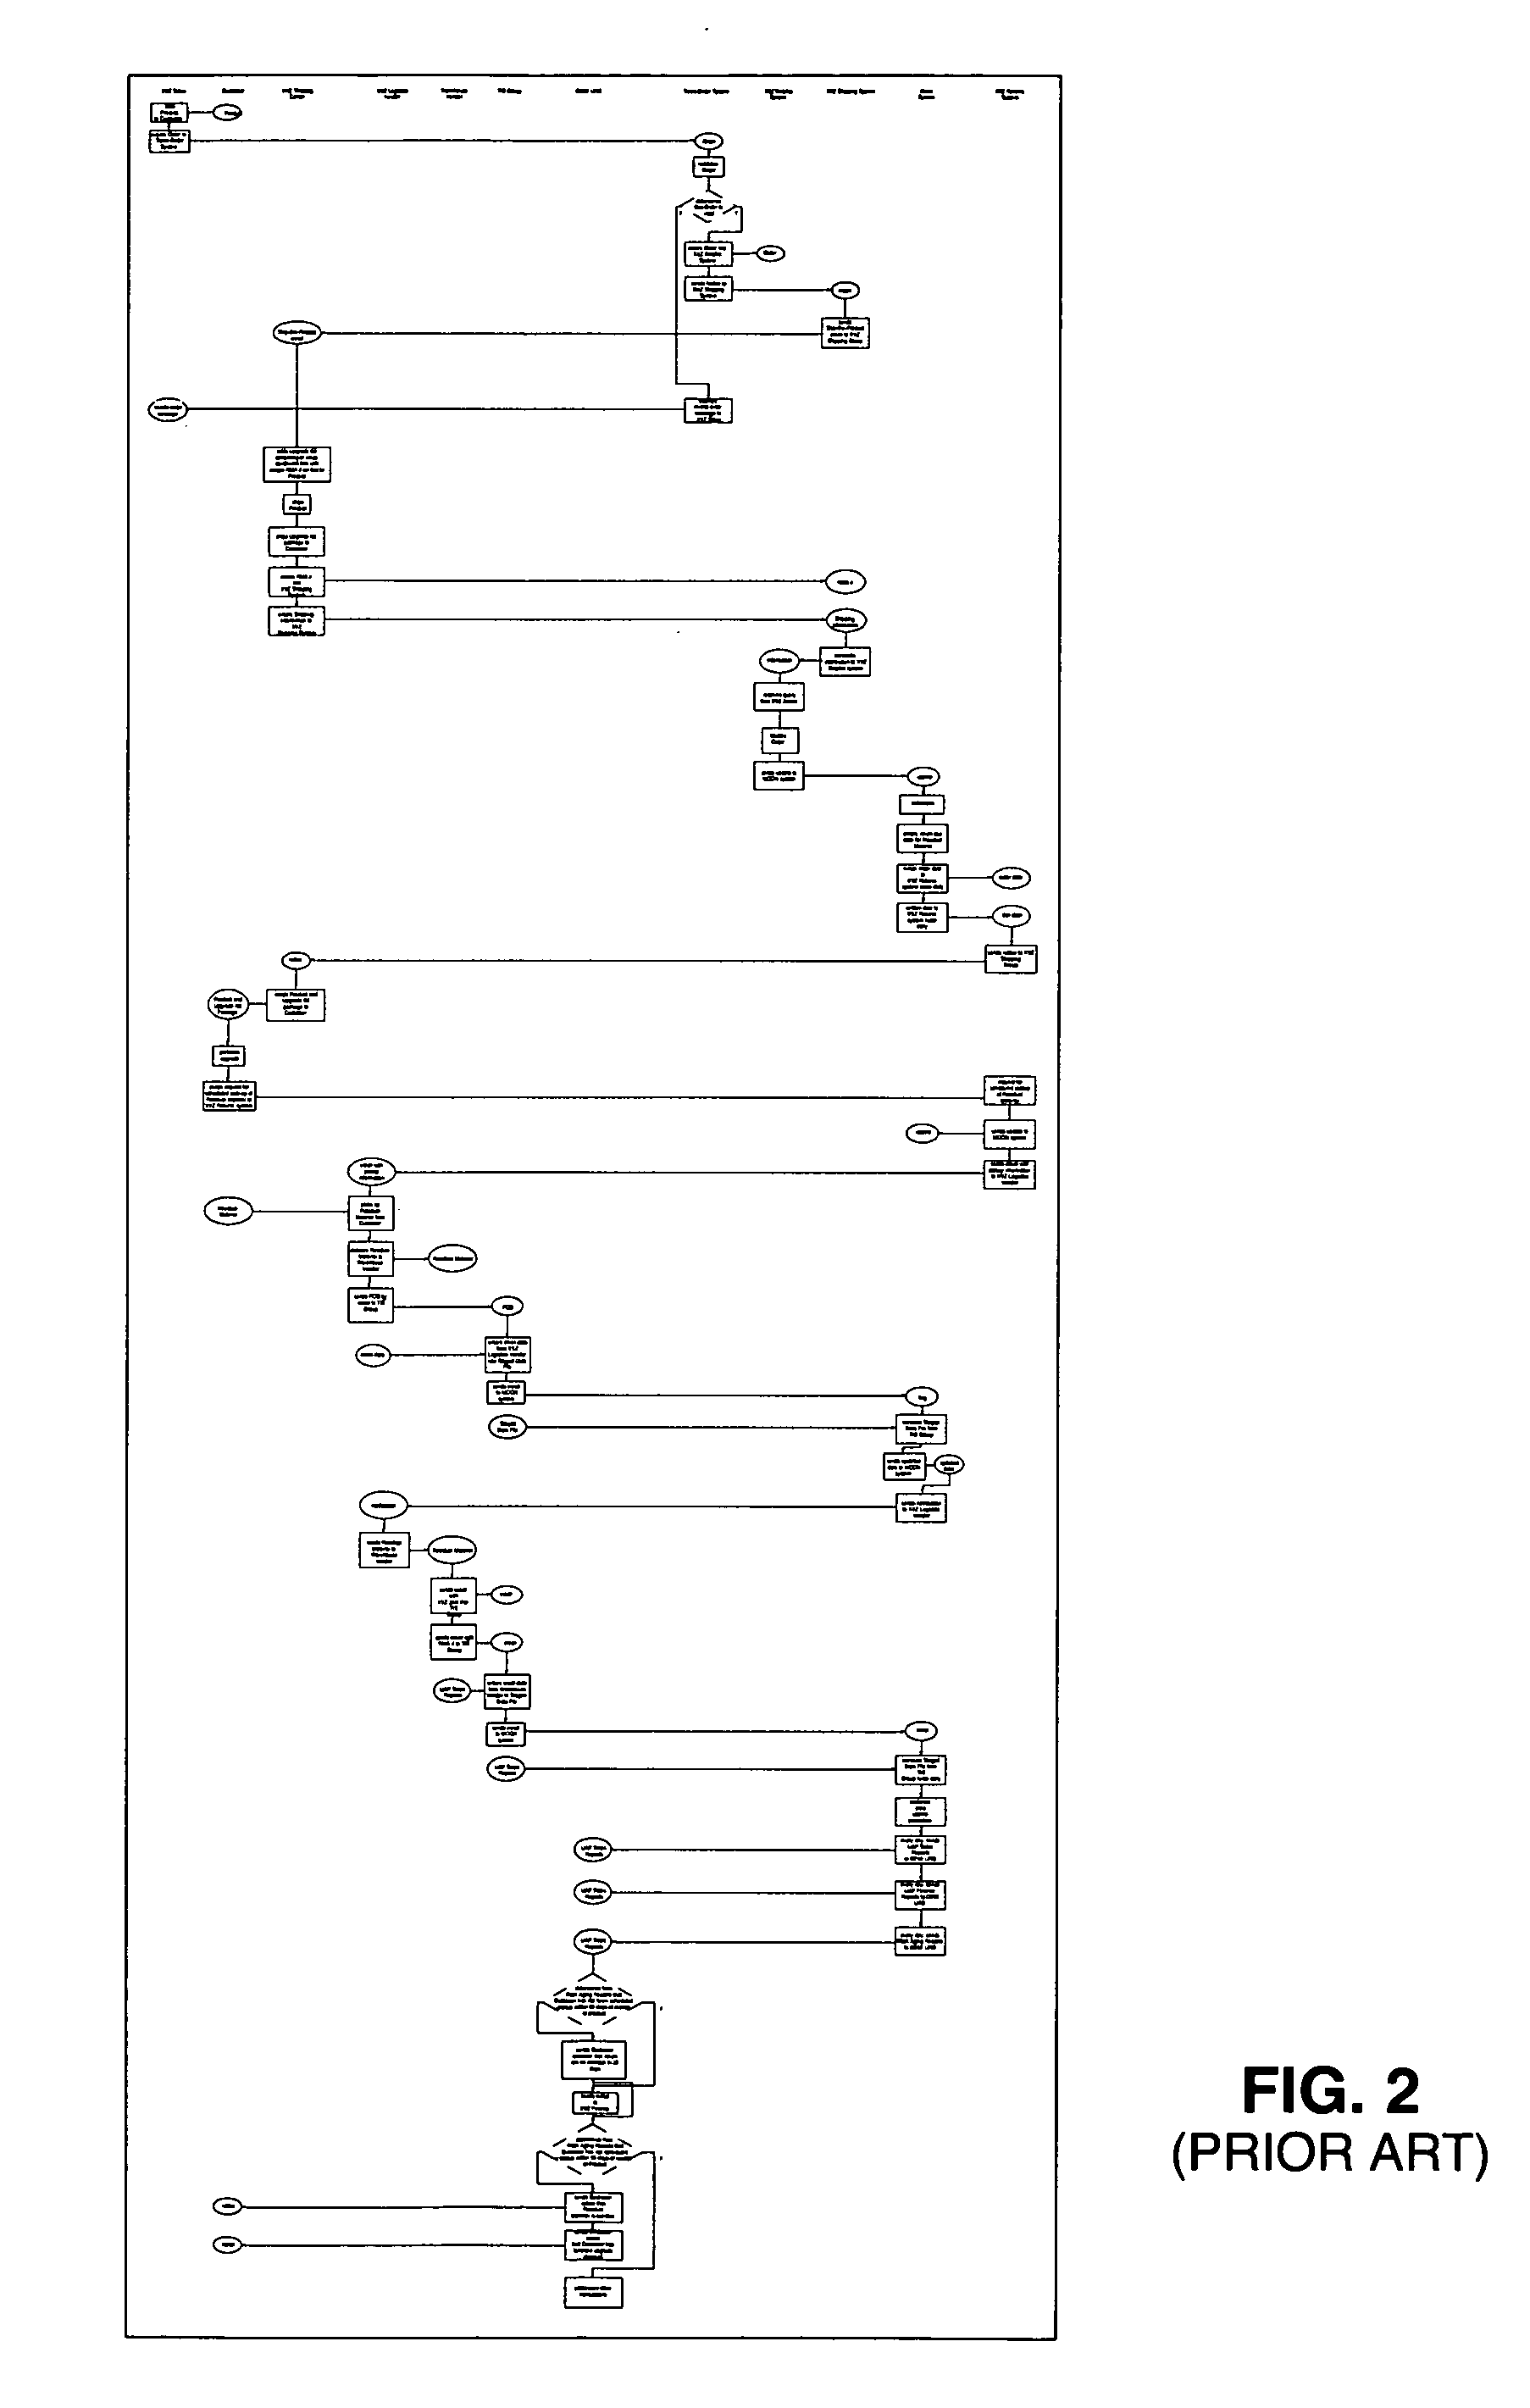 System and method for representing large activity diagrams